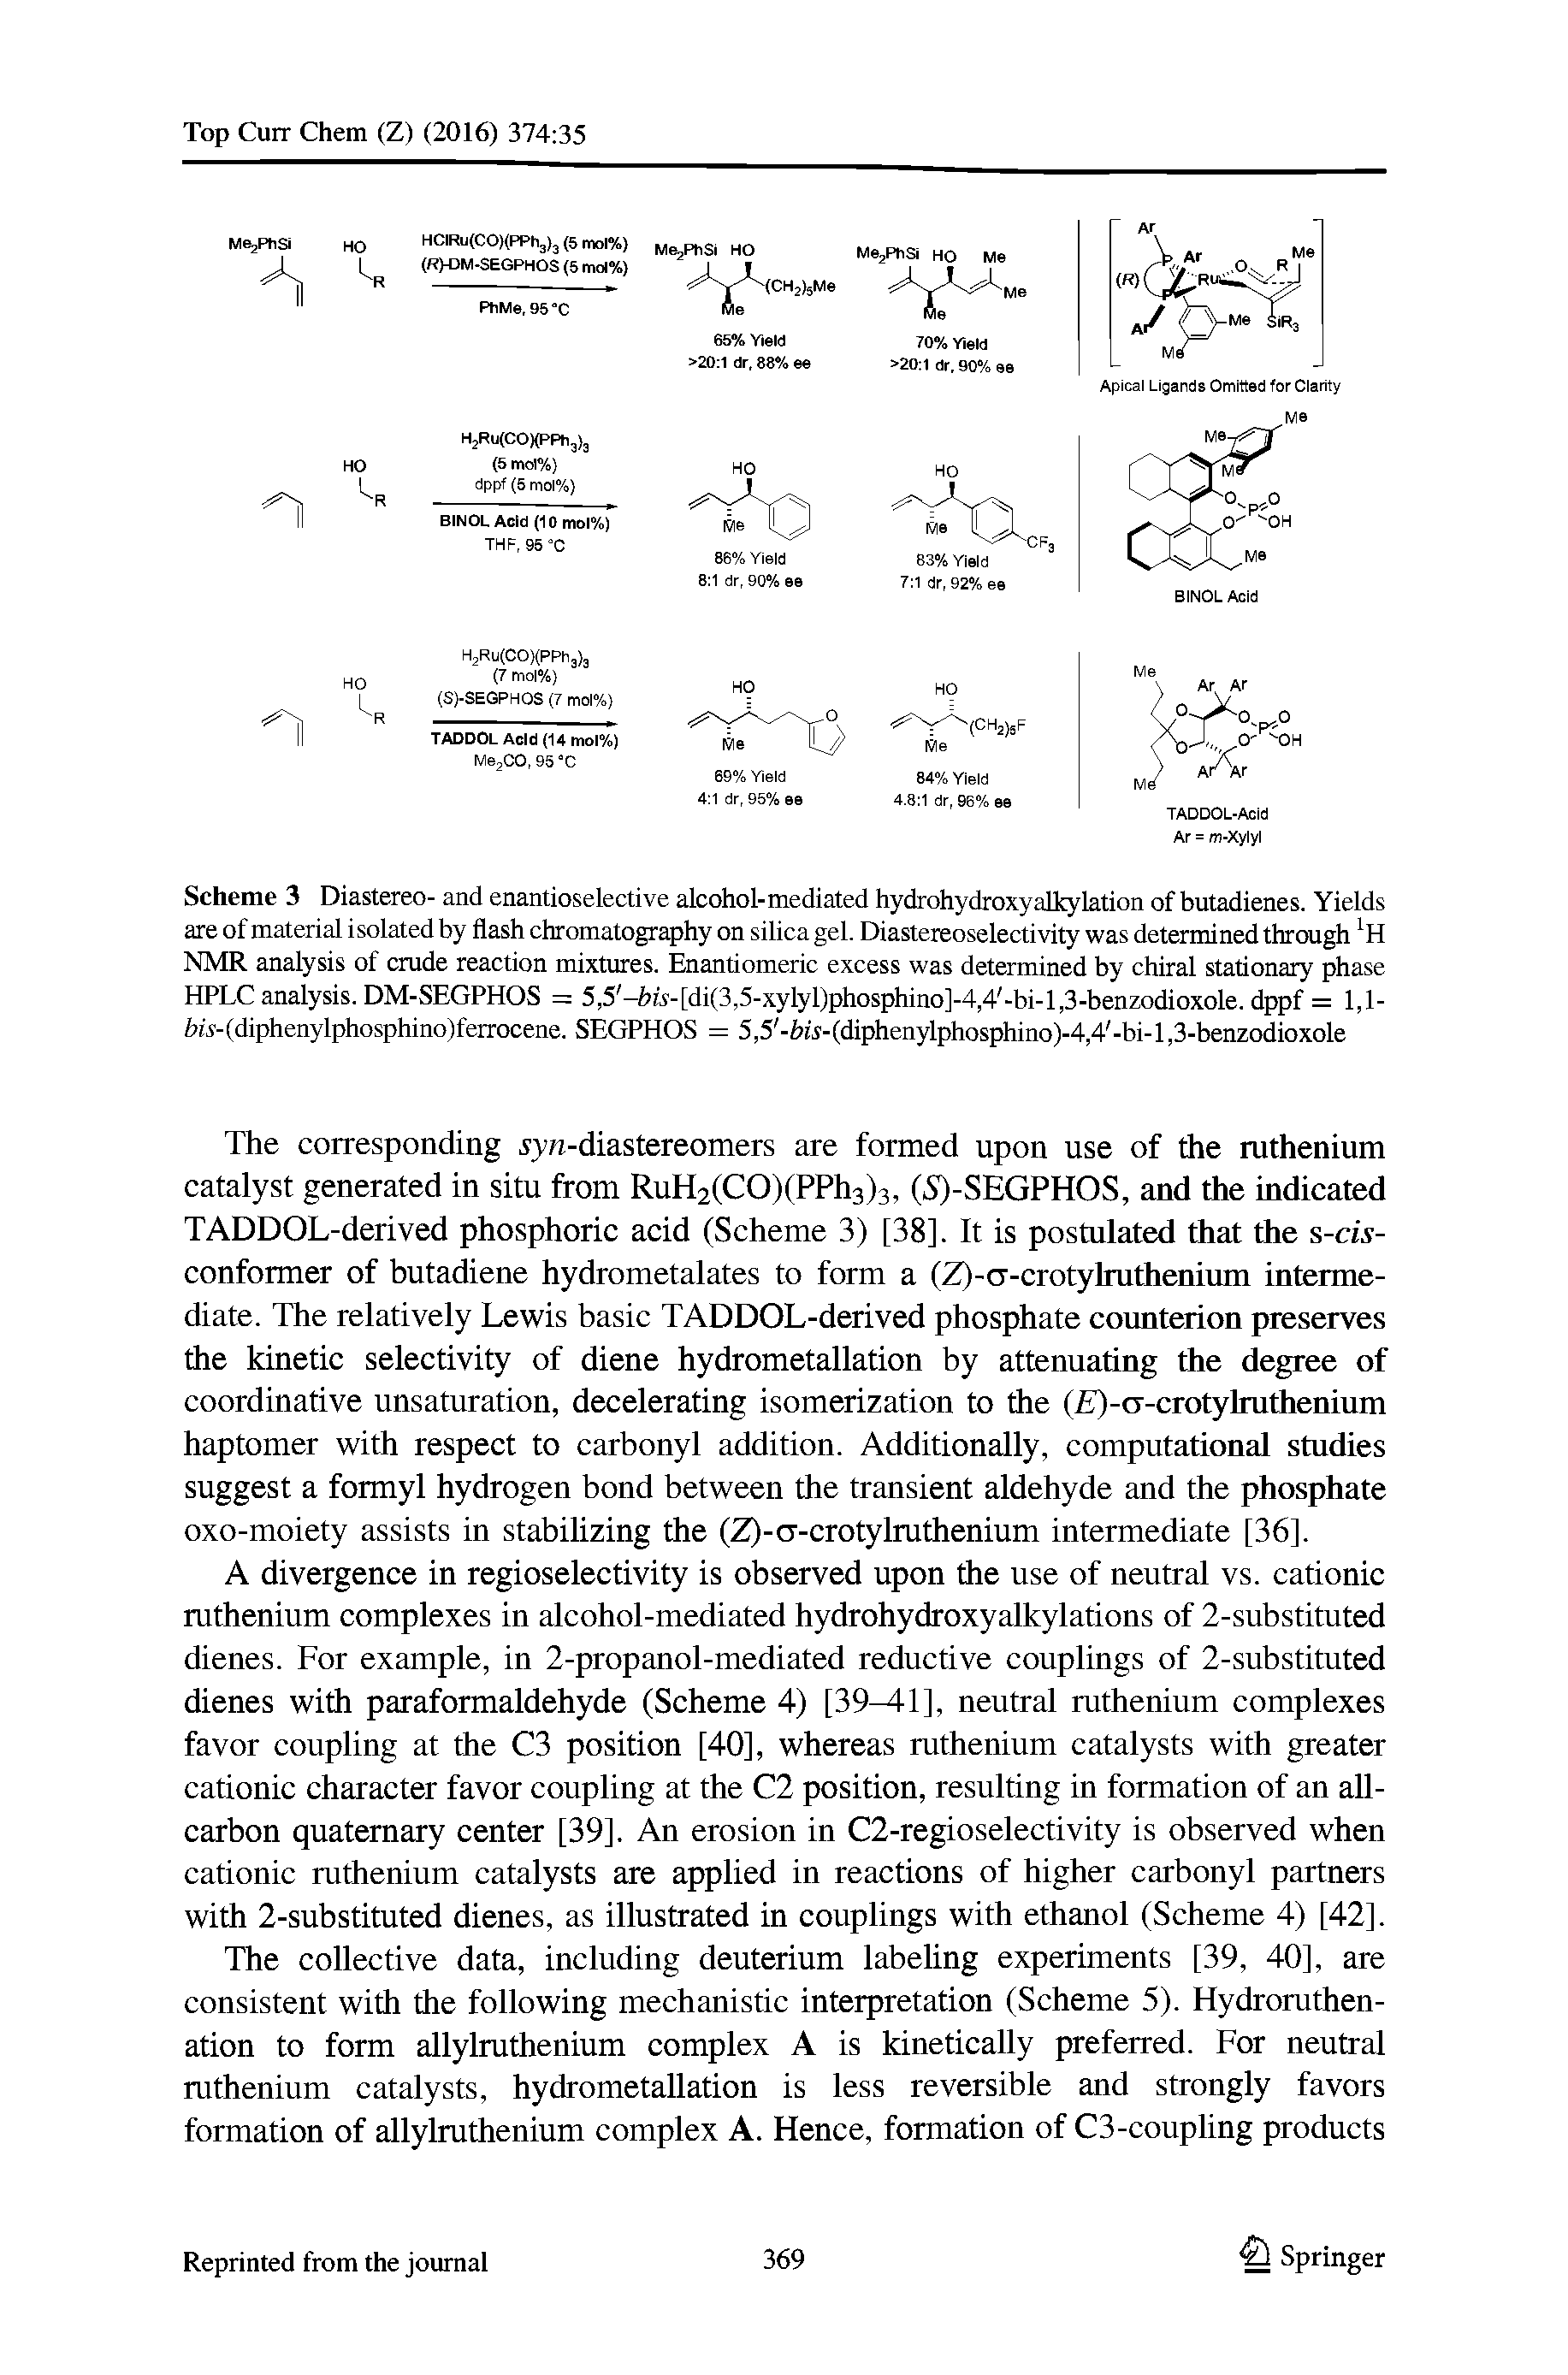 Scheme 3 Diastereo- and enantioselective alcohol-mediated hydrohydroxyalkylation of butadienes. Yields are of material isolated by flash chromatography on silica gel. Diastereoselectivity was determined through NMR analysis of crude reaction mixtures. Enantiomeric excess was determined by chiral stationary phase HPLC analysis. DM-SEGPHOS = 5,5 -fots-[di(3,5-xylyl)phosphino]-4,4 -bi-l,3-benzodioxole. dppf = 1,1-(>M-(diphenylphosphino)ferrocene. SEGPHOS = 5,5 -Ws-(diphenylphosphino)-4,4 -bi-l,3-benzodioxole...